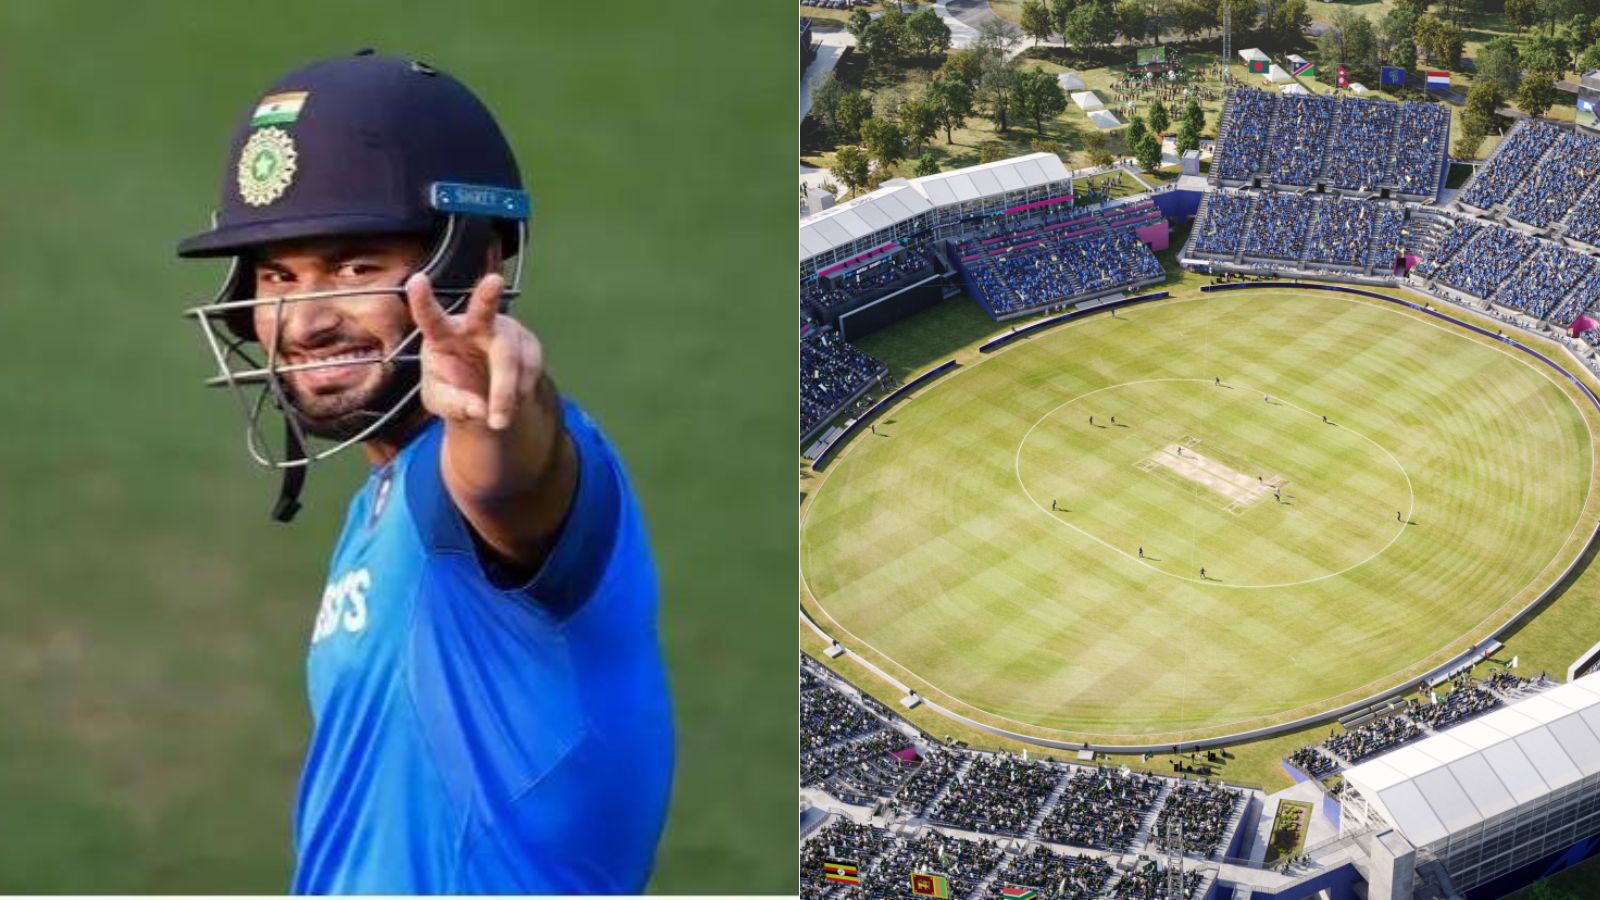 Rishabh Pant shares his excitement for World Cup in USA: Cricket’s global growth and exposure opportunities are promising | Cricket News